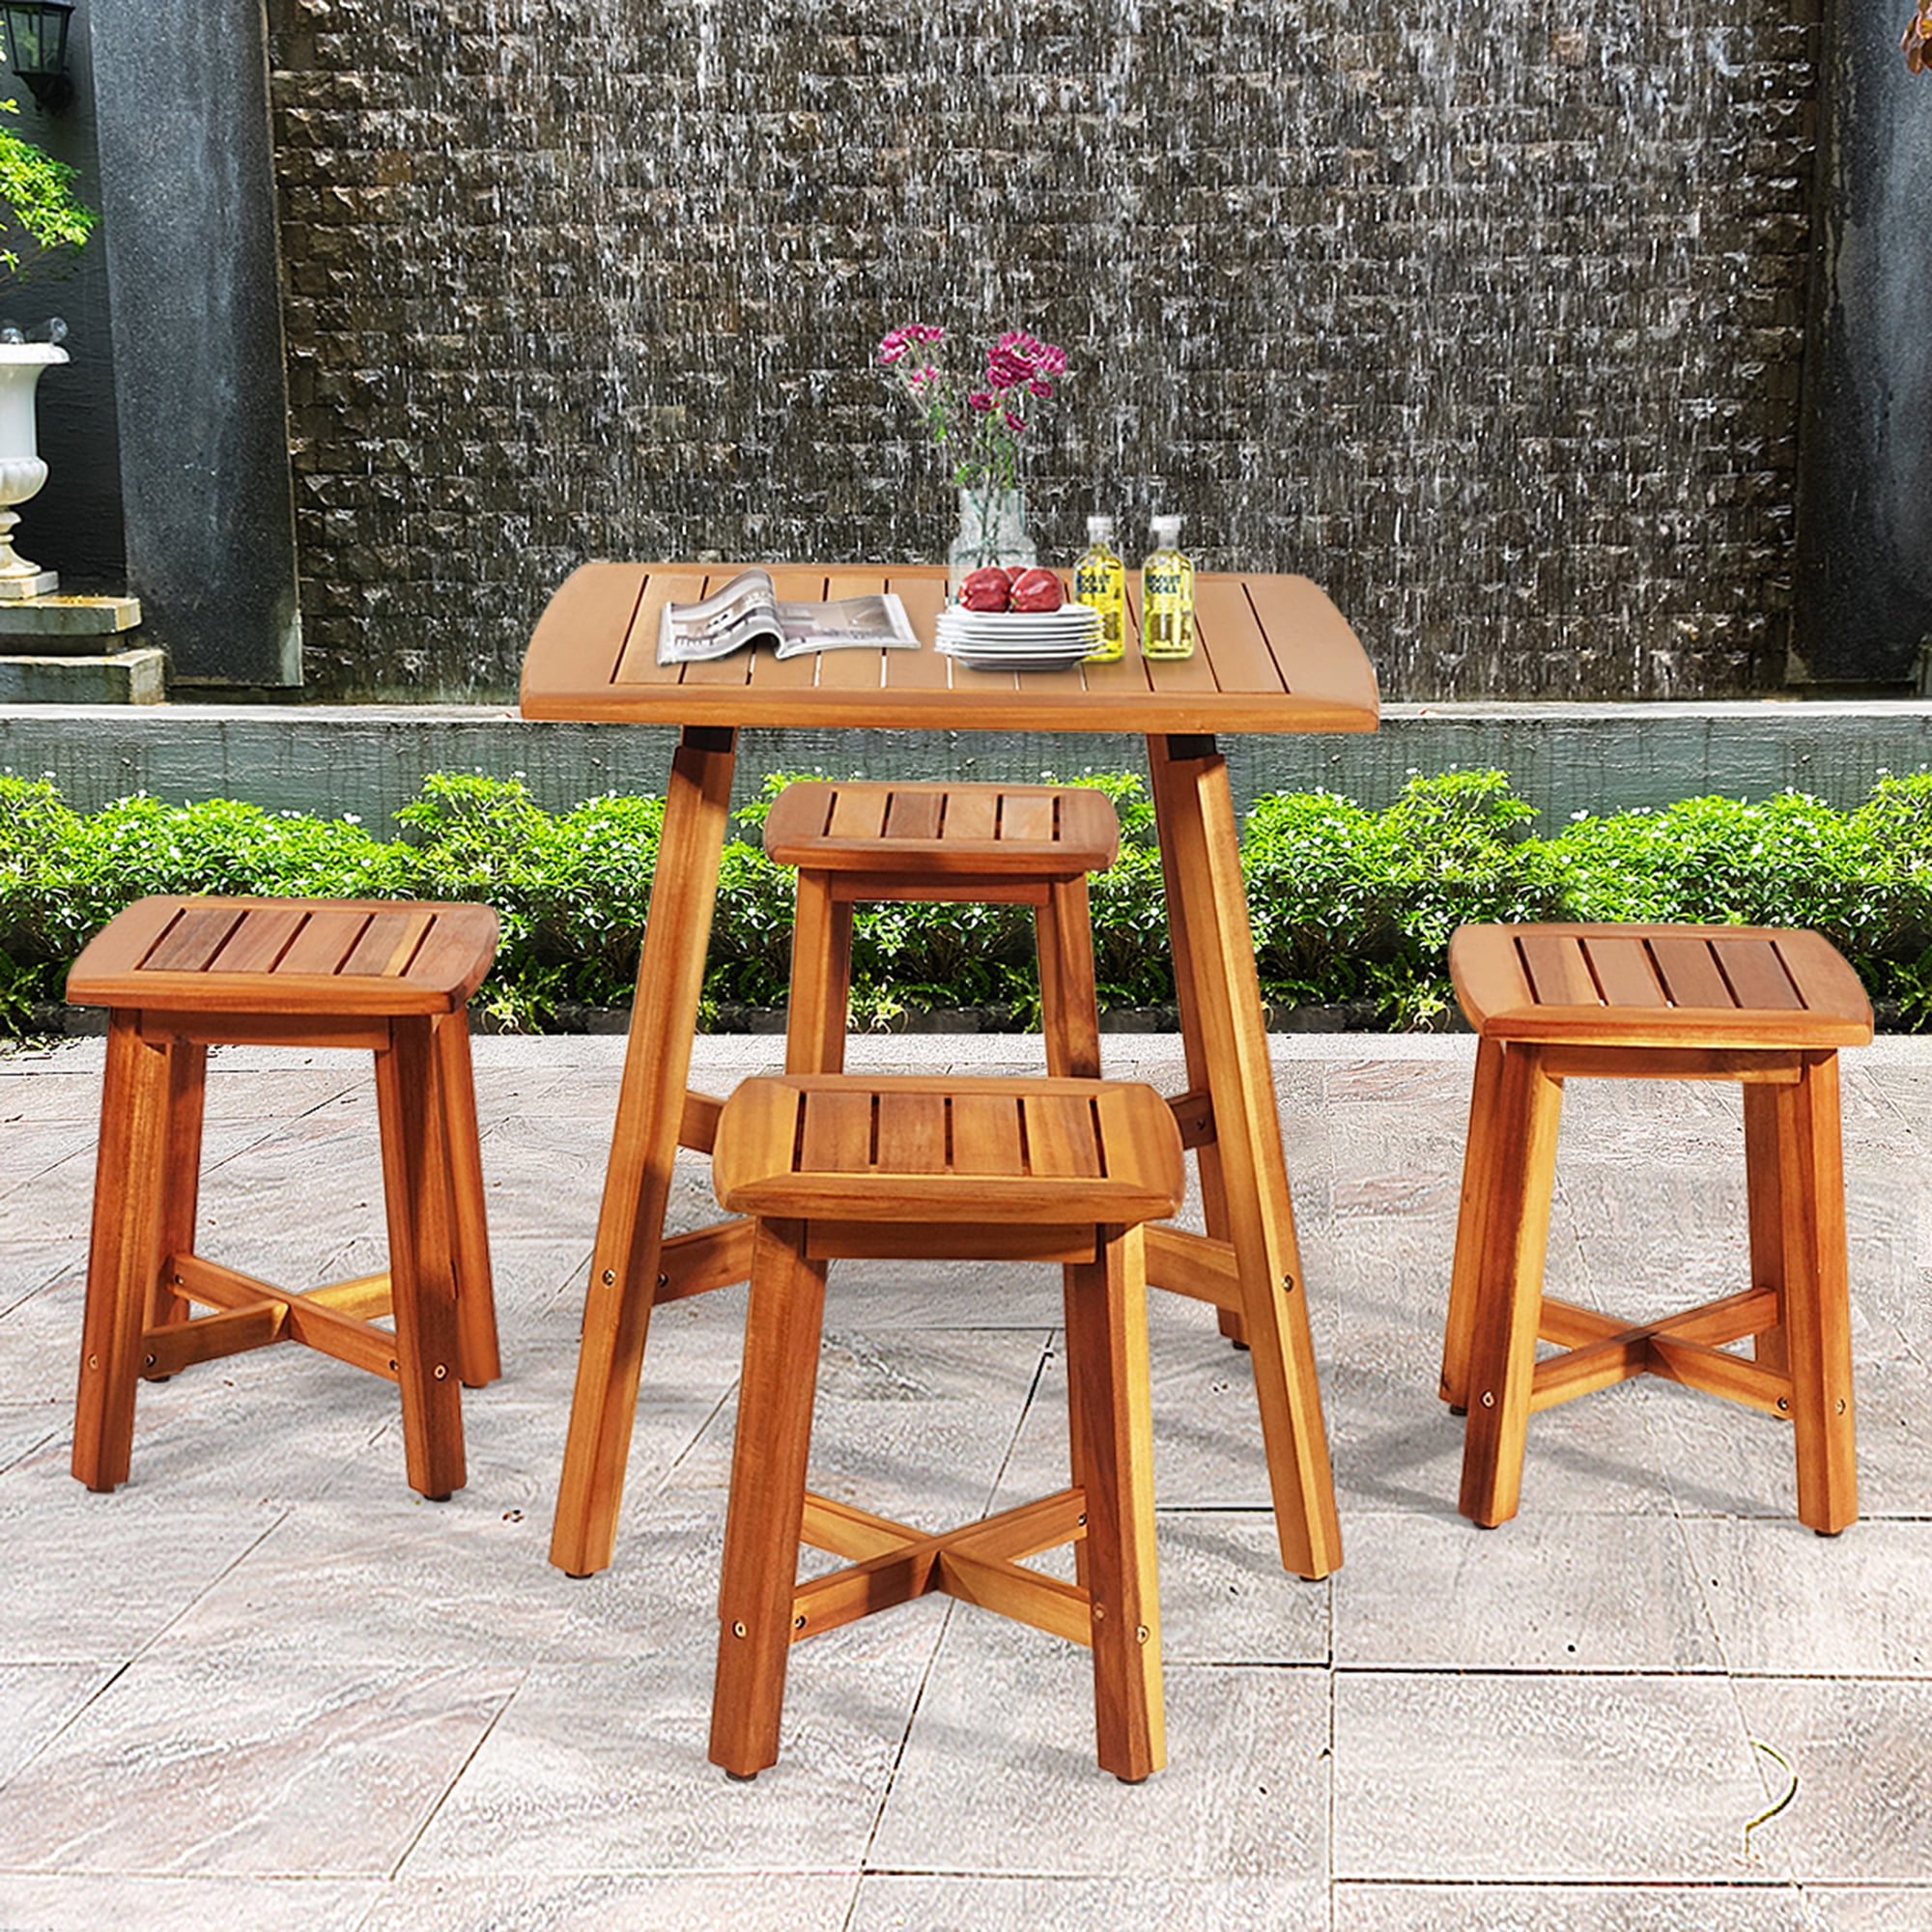 Gymax 5PCS Wooden Patio Dining Furniture Set Yard Outdoor w/ 4 Square ...
